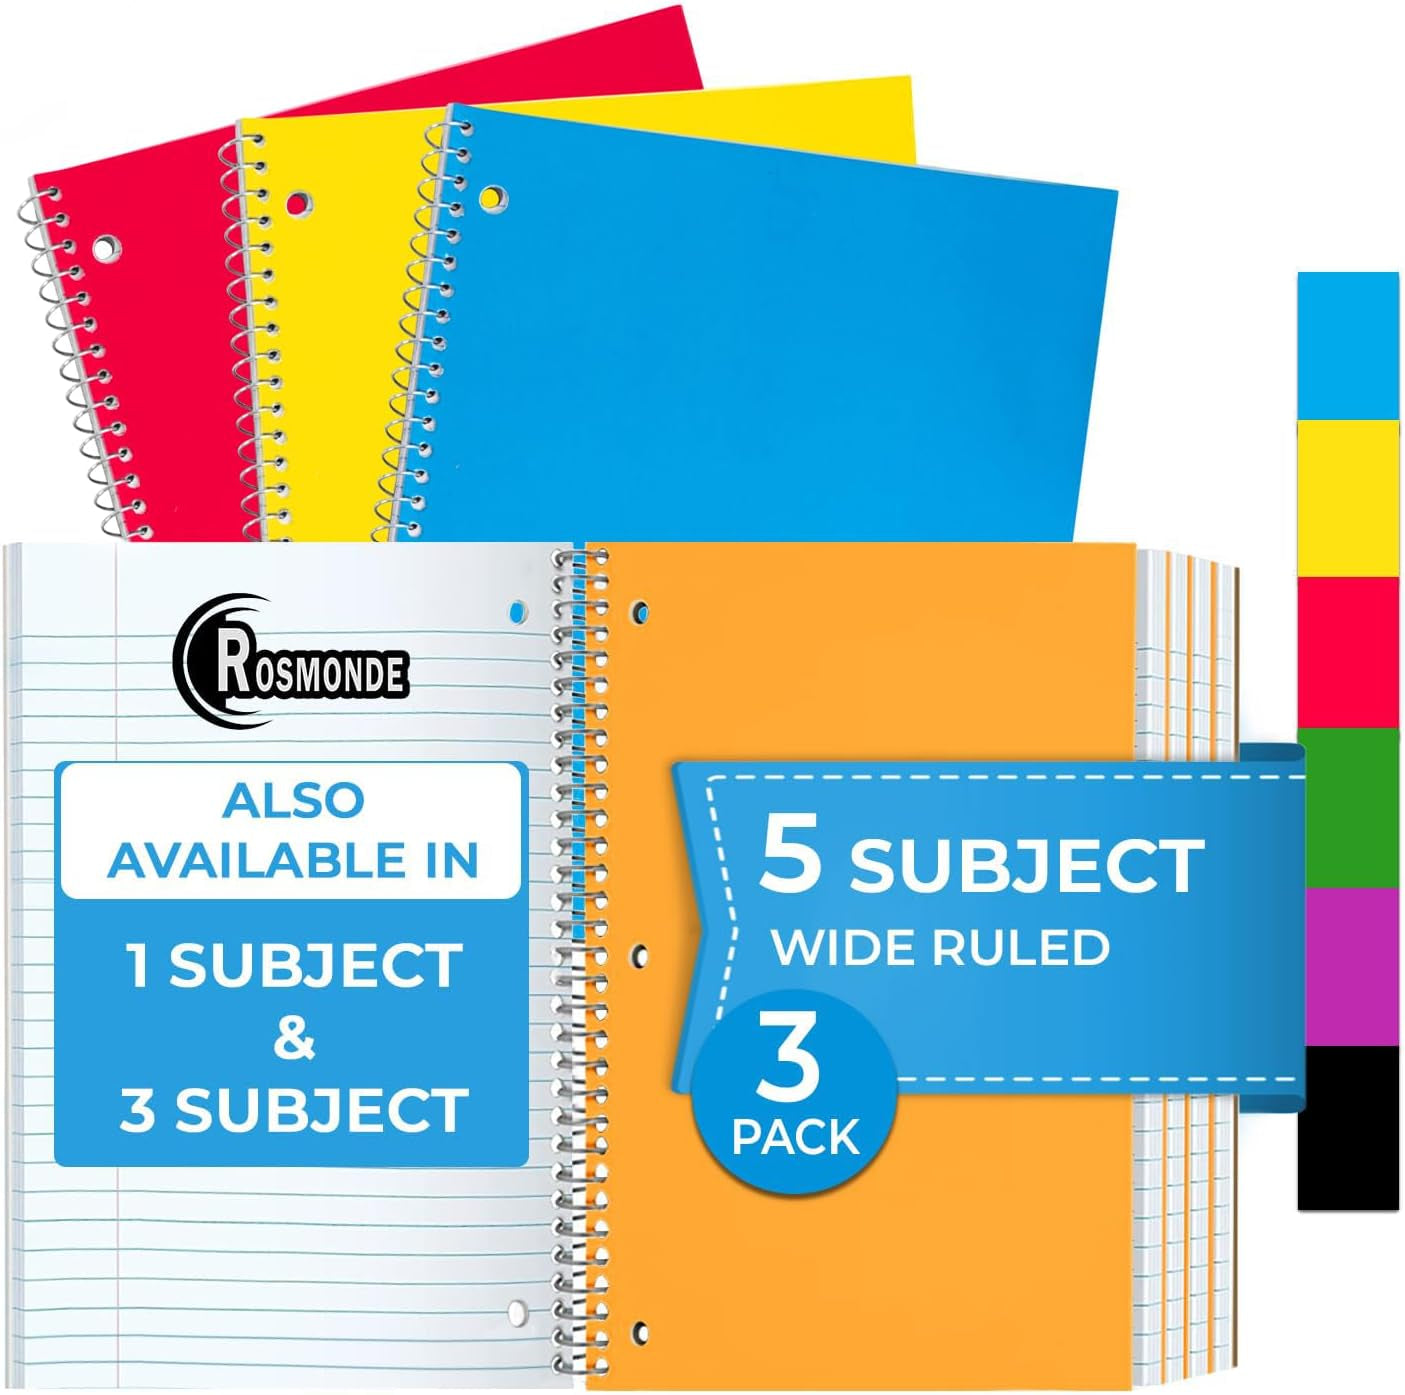 Spiral Notebooks, 12 Pack, 1 Subject Notebook, Wide Ruled, 70 Sheets, 8 X 10-1/2", 3 Hole Punched, School Supplies, Bulk Single Subject Spiral Notebook Bulk, Assorted Colors Pack of Notebooks